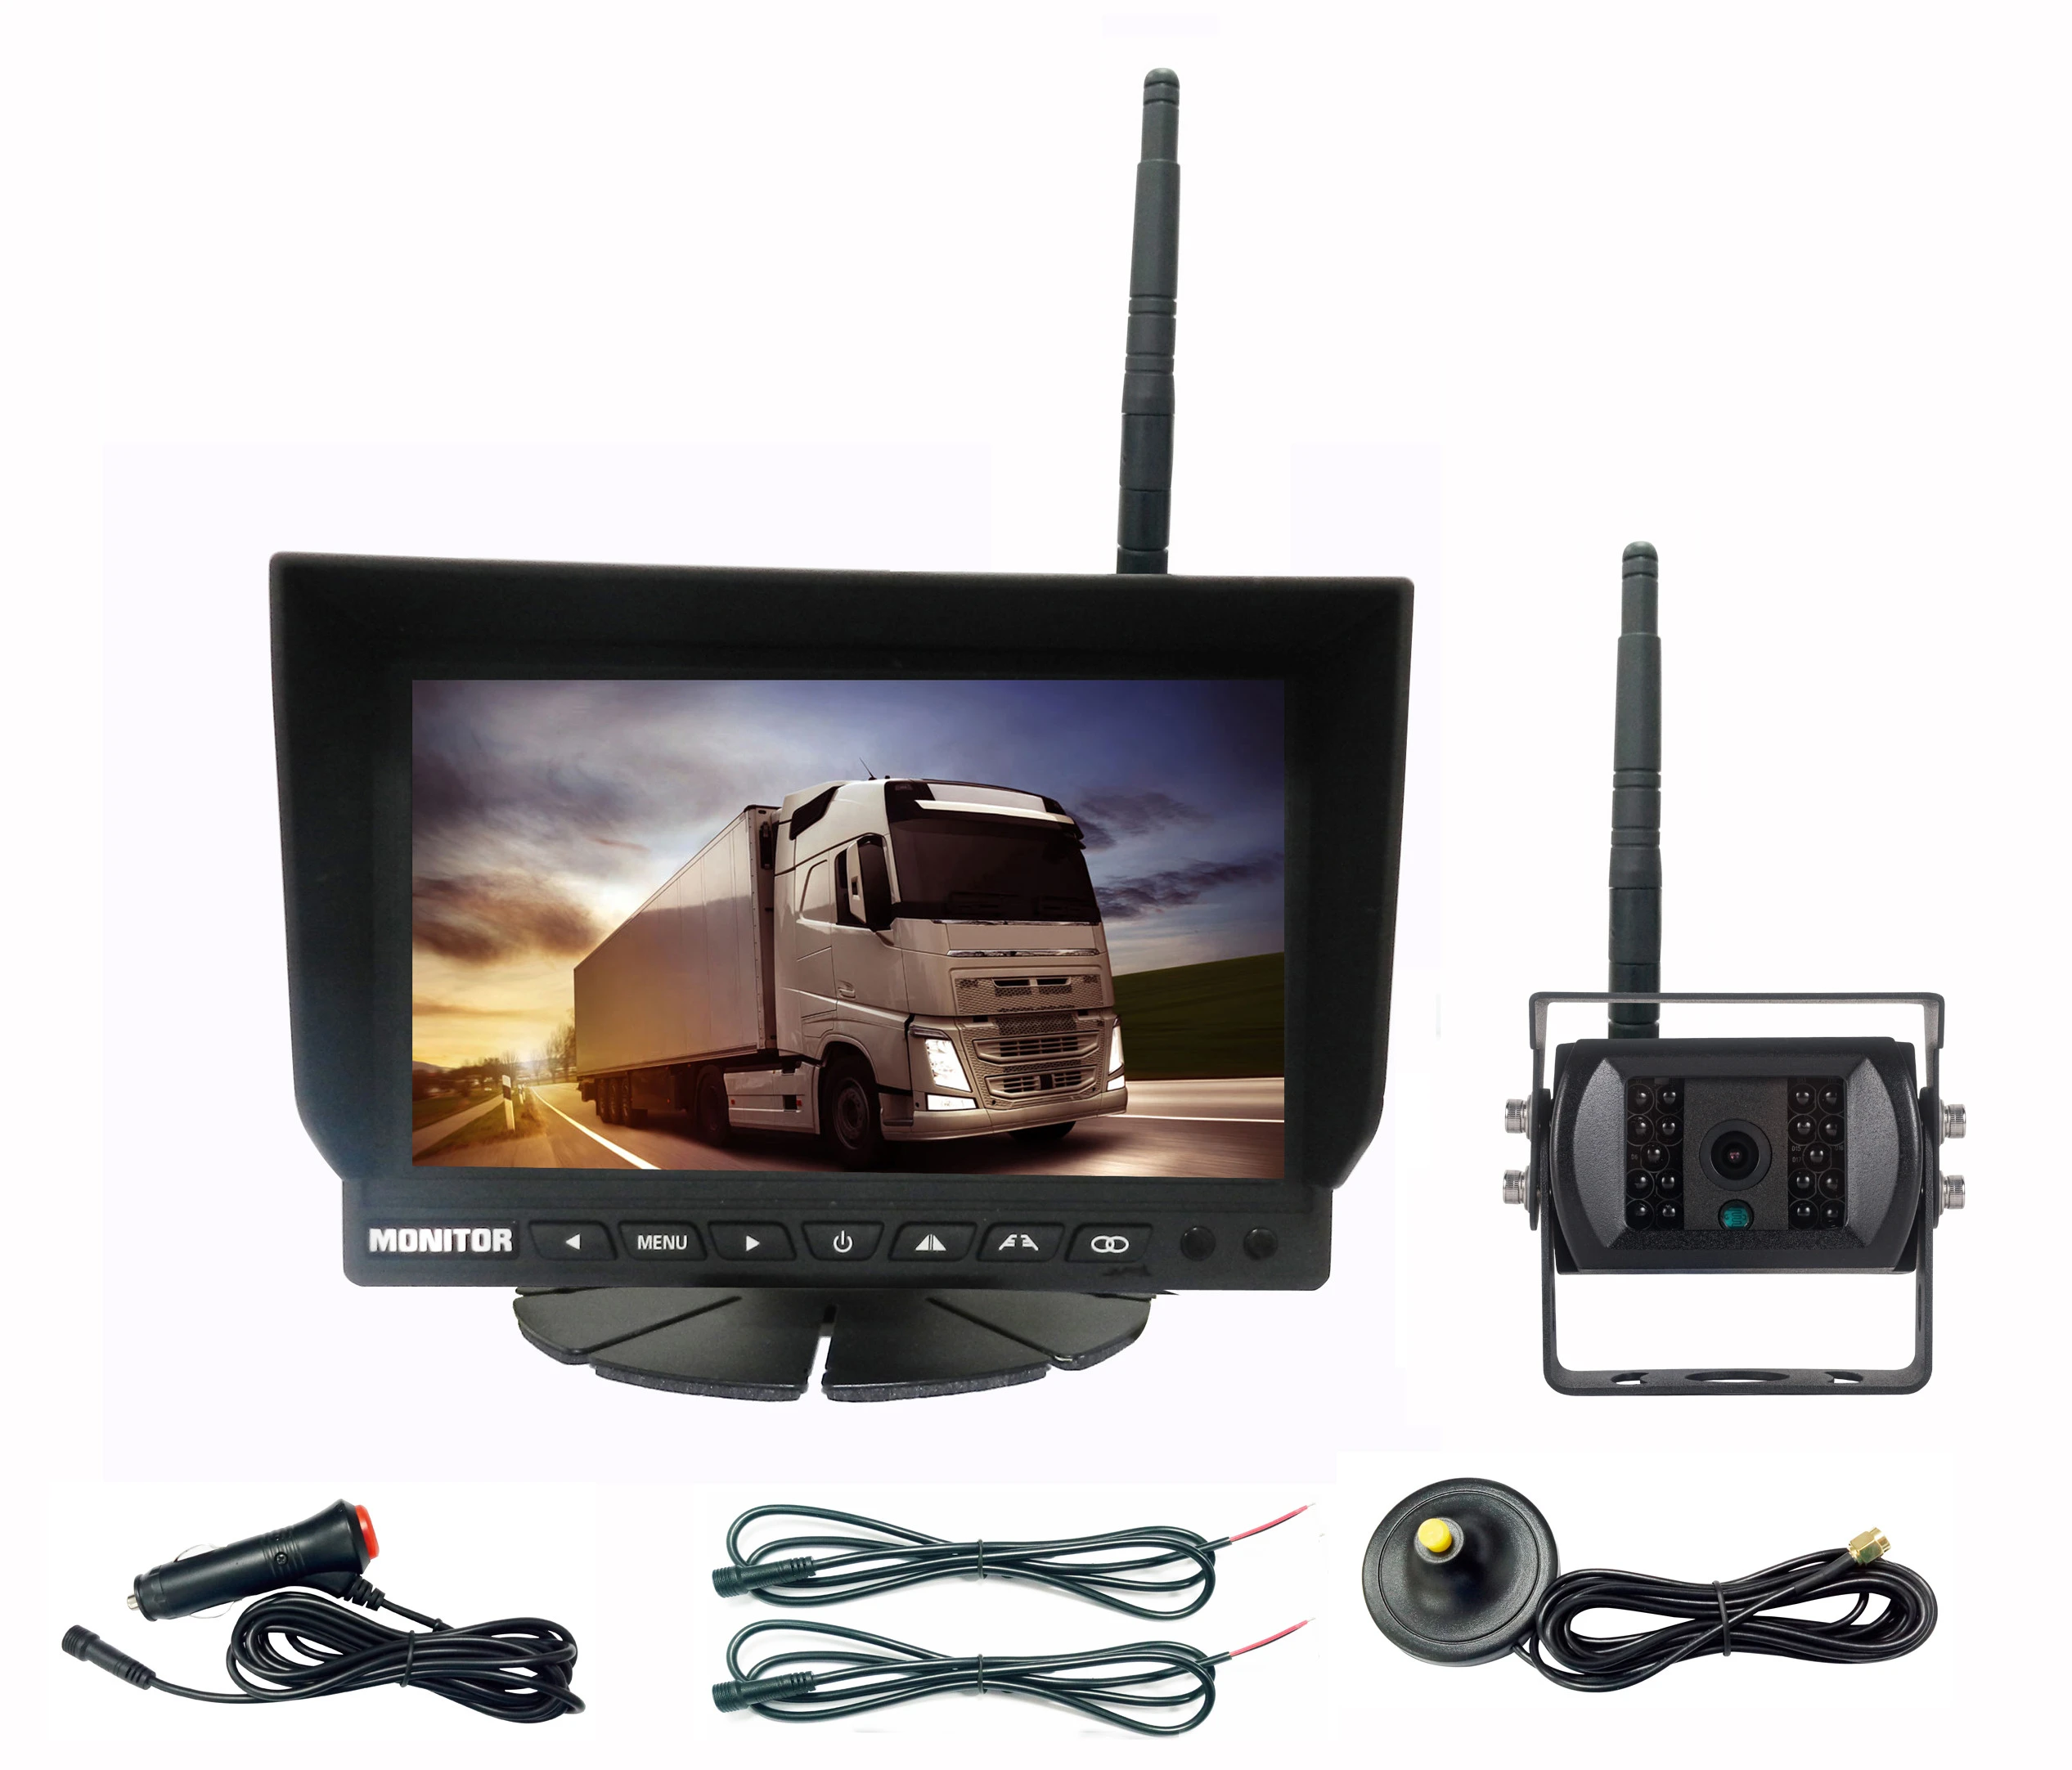 2.4G HD Wireless Rear View Car Monitor with 1 Channel Display